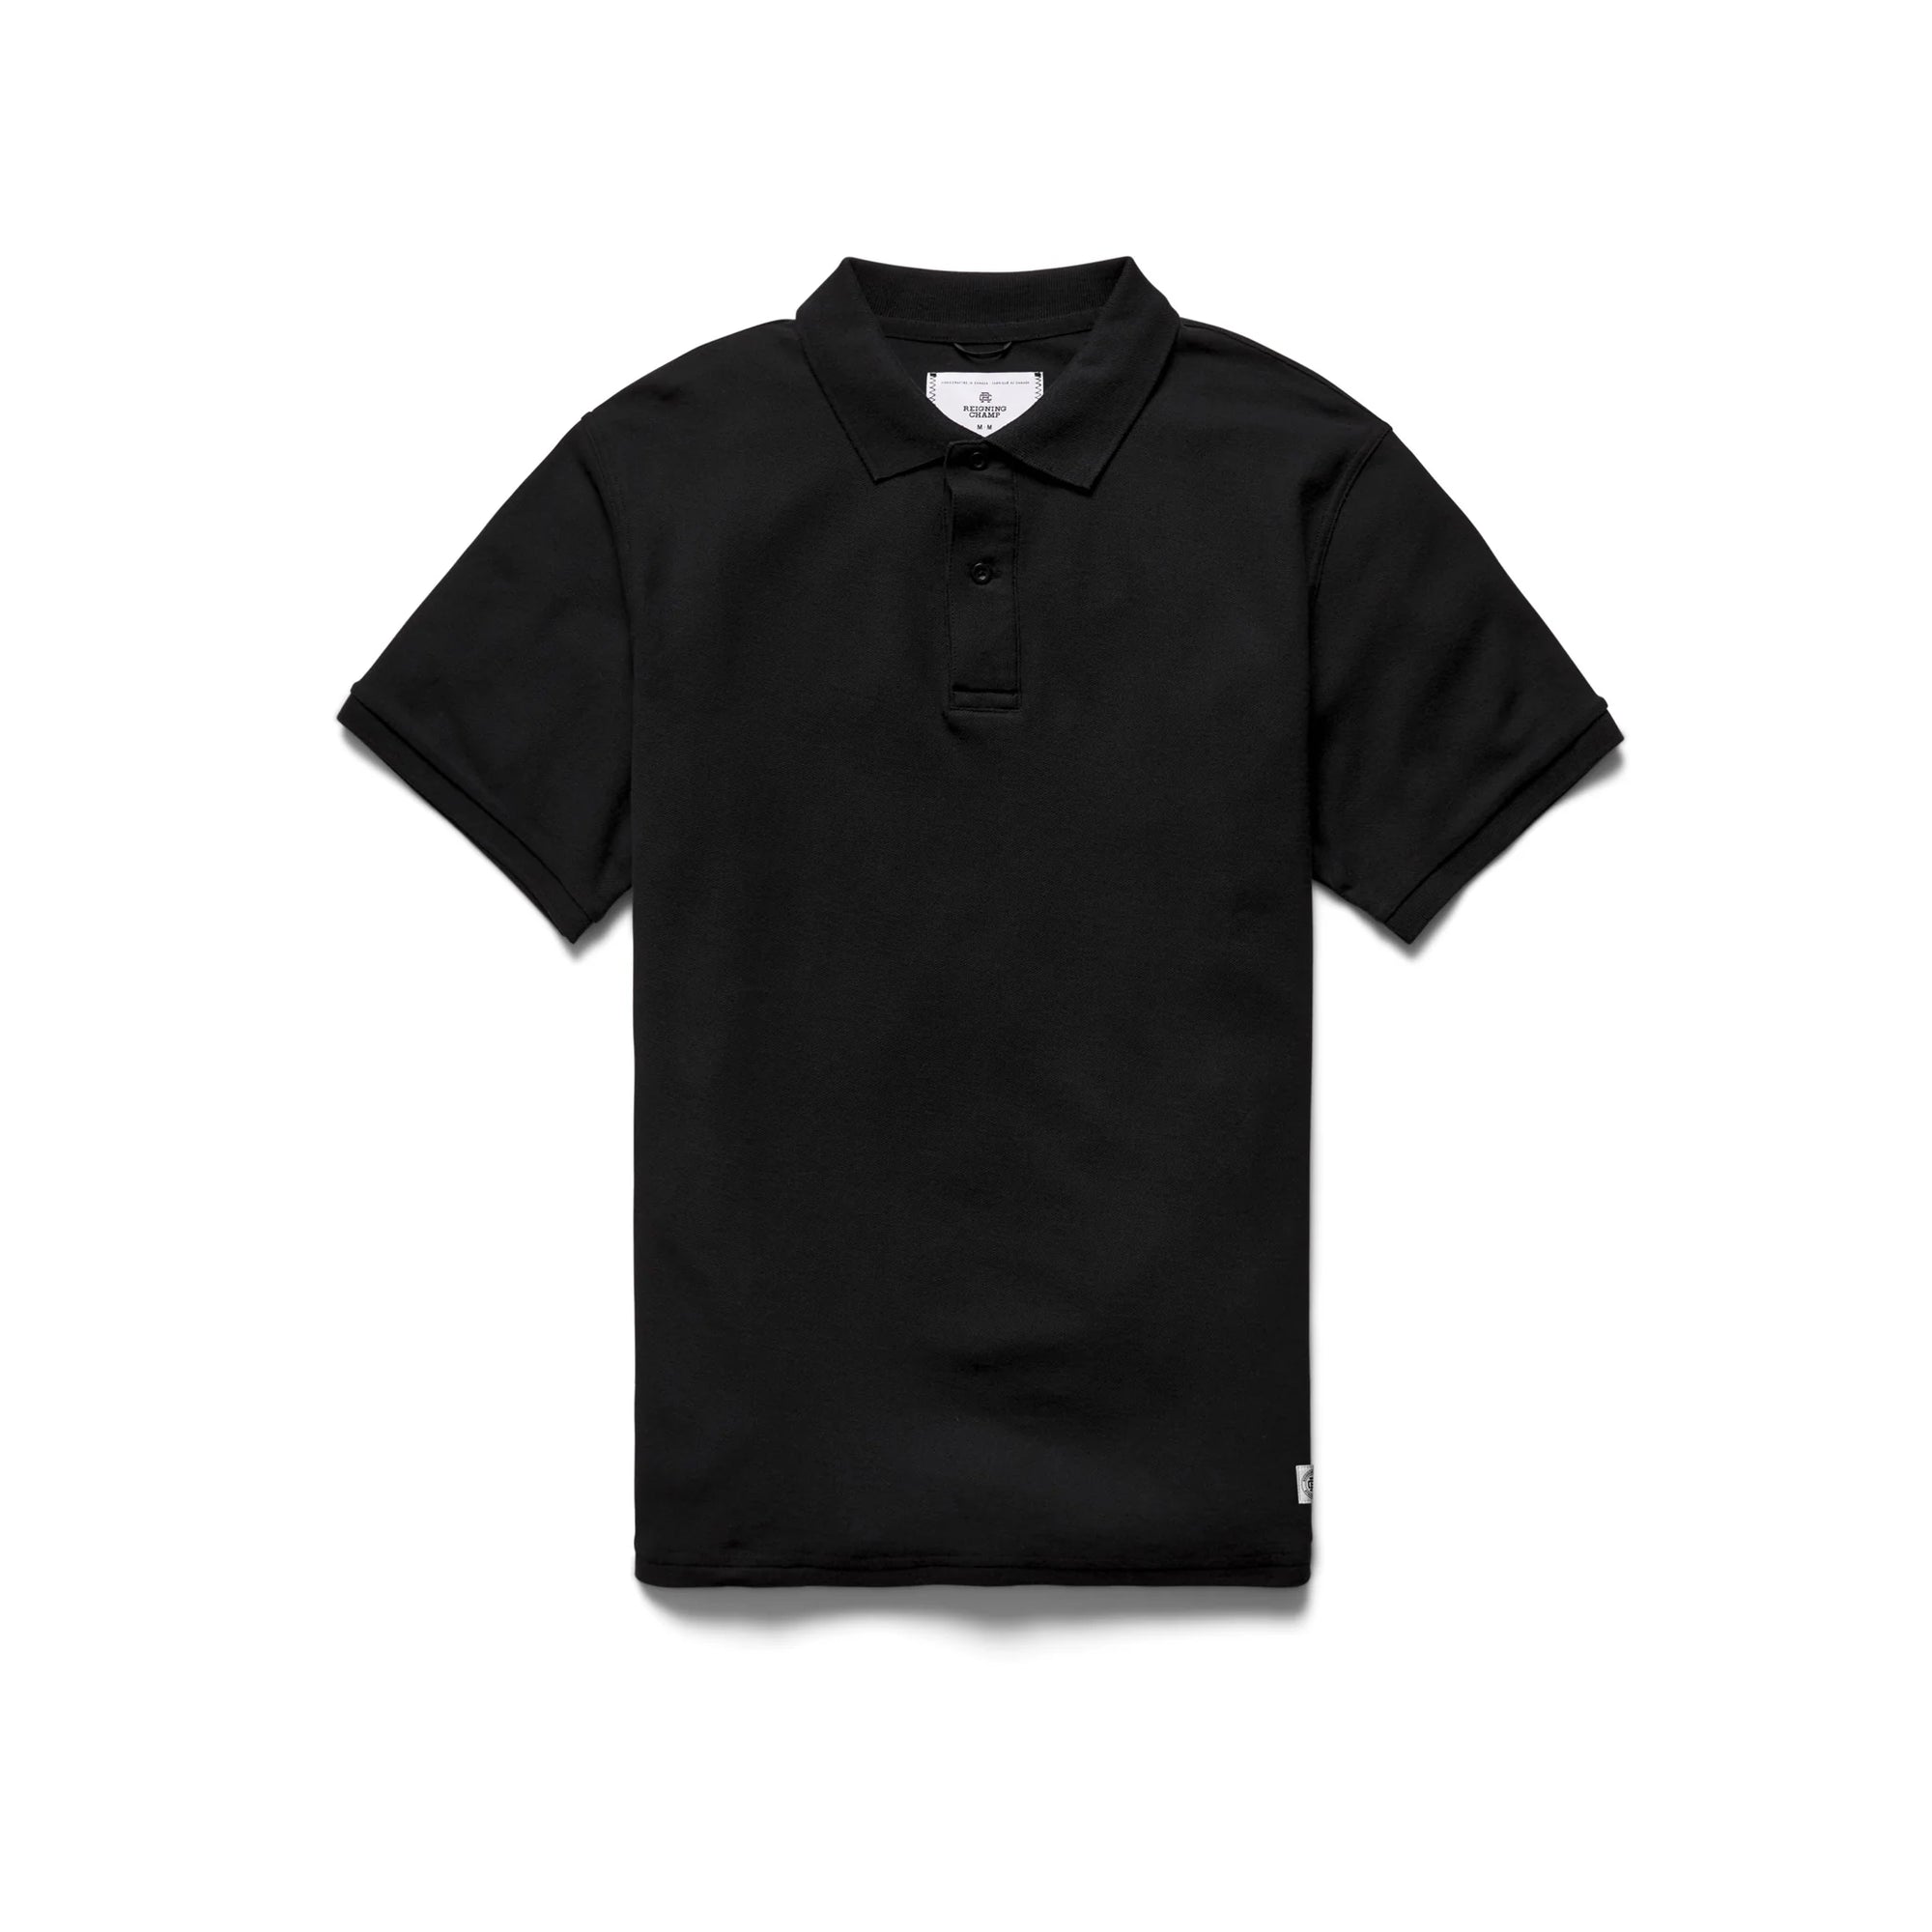 Reigning Champ Classic Pique Polo in Black